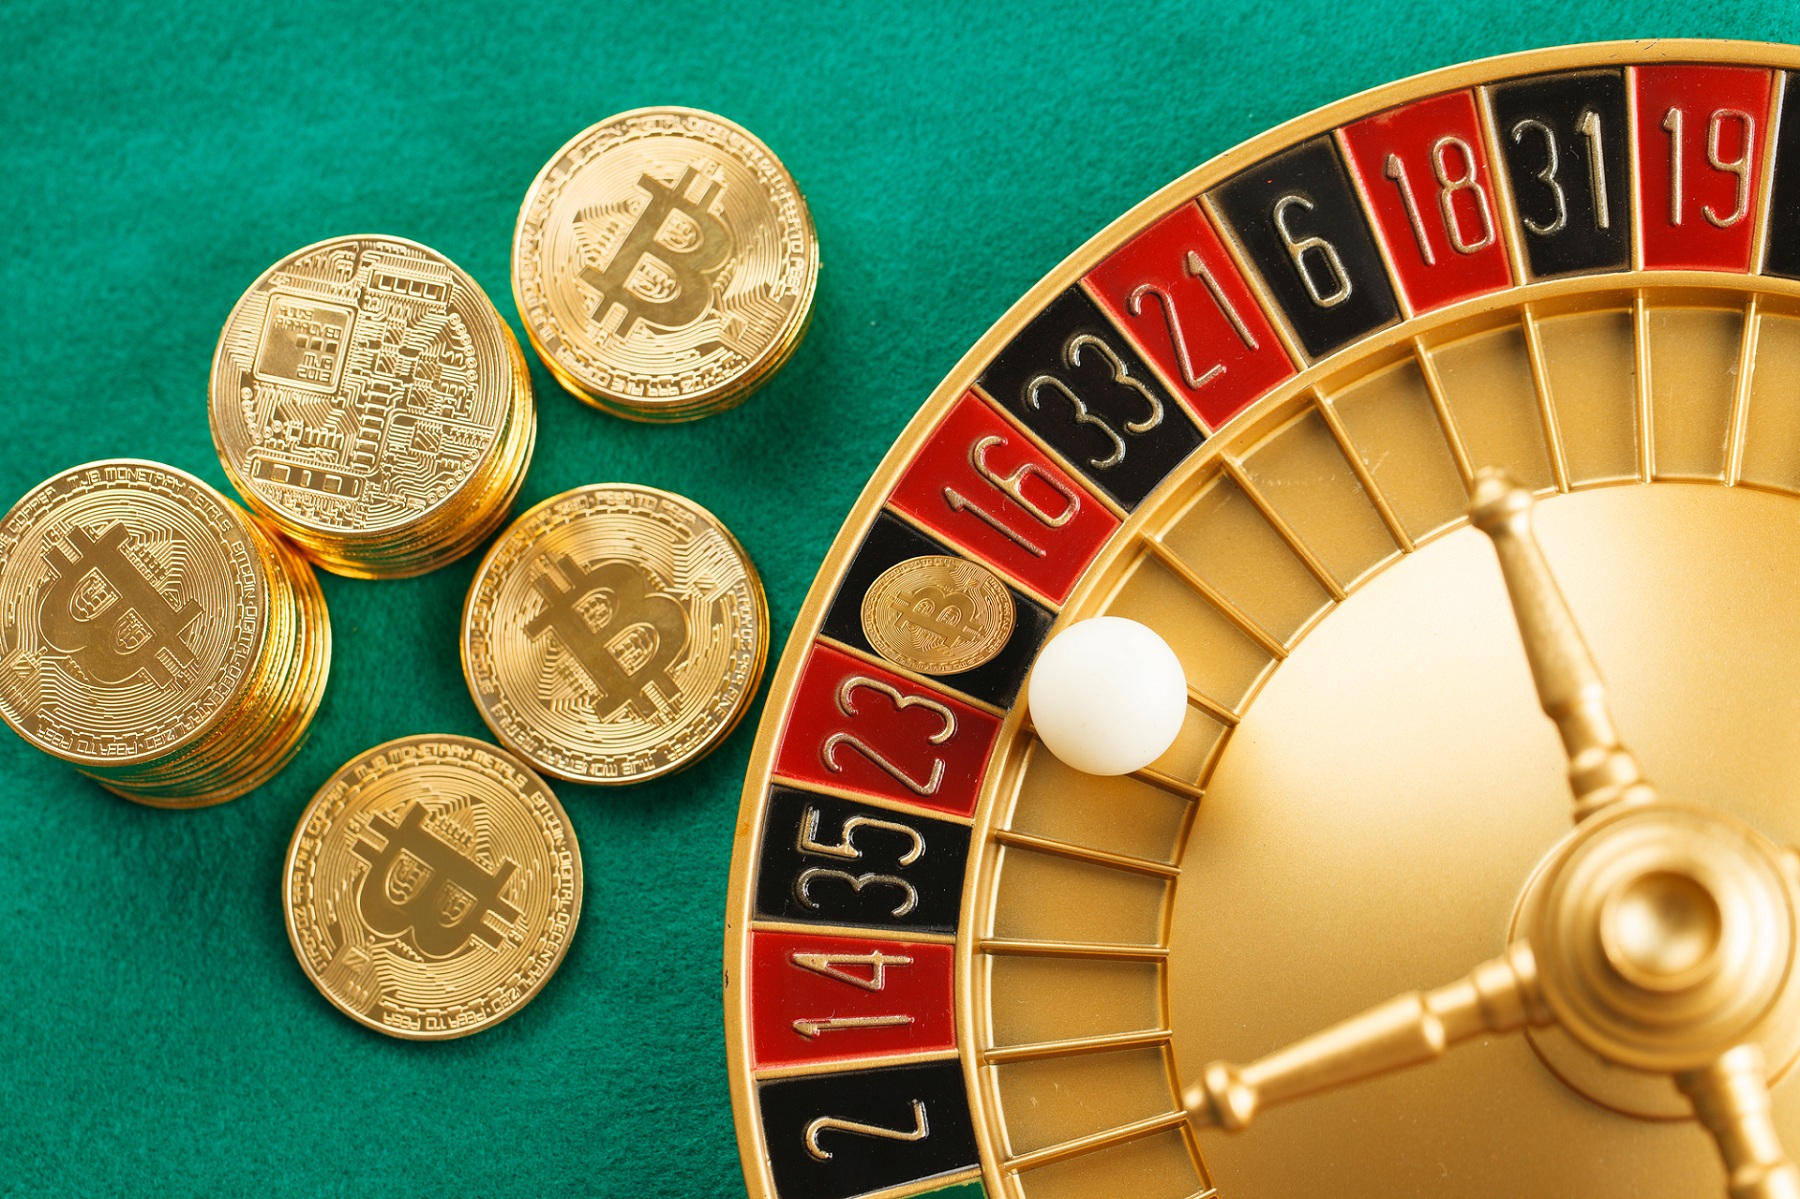 5 Tips for Finding Reliable Bitcoin Casinos - 2020 Guide - The Event ...